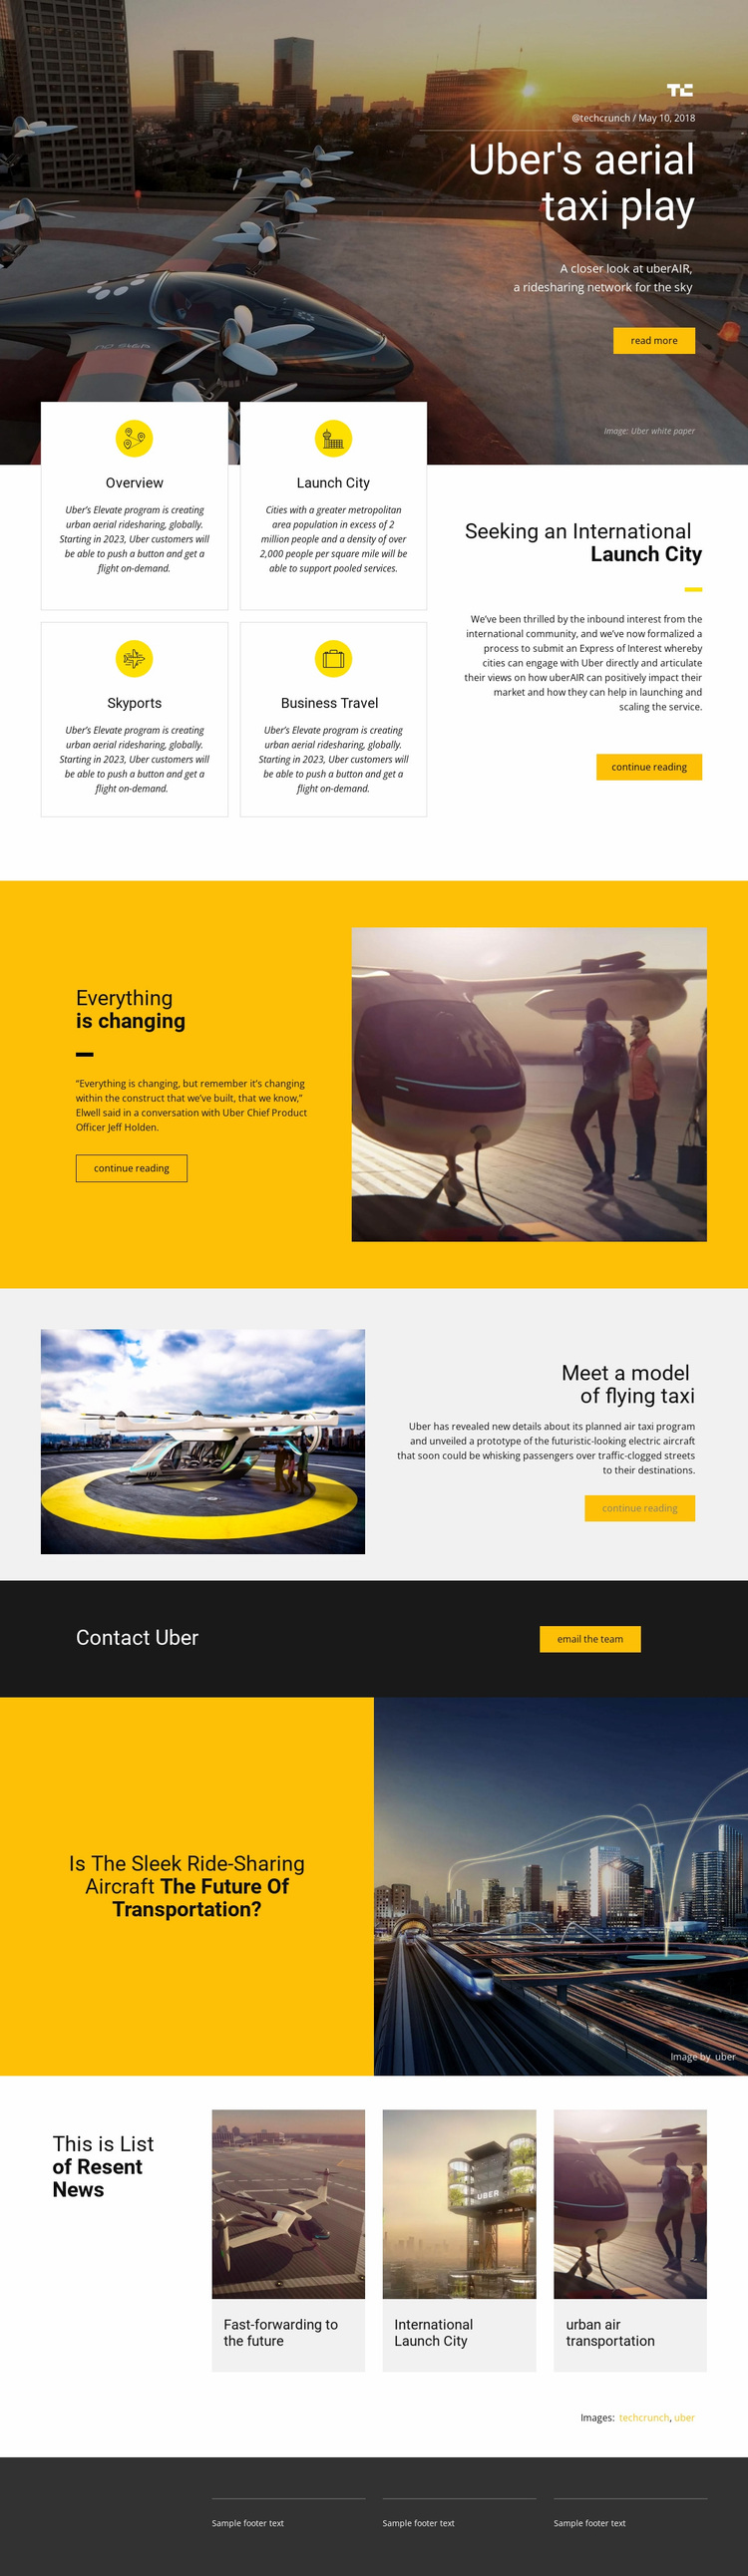 Uber's Aerial Taxi Play Website Design